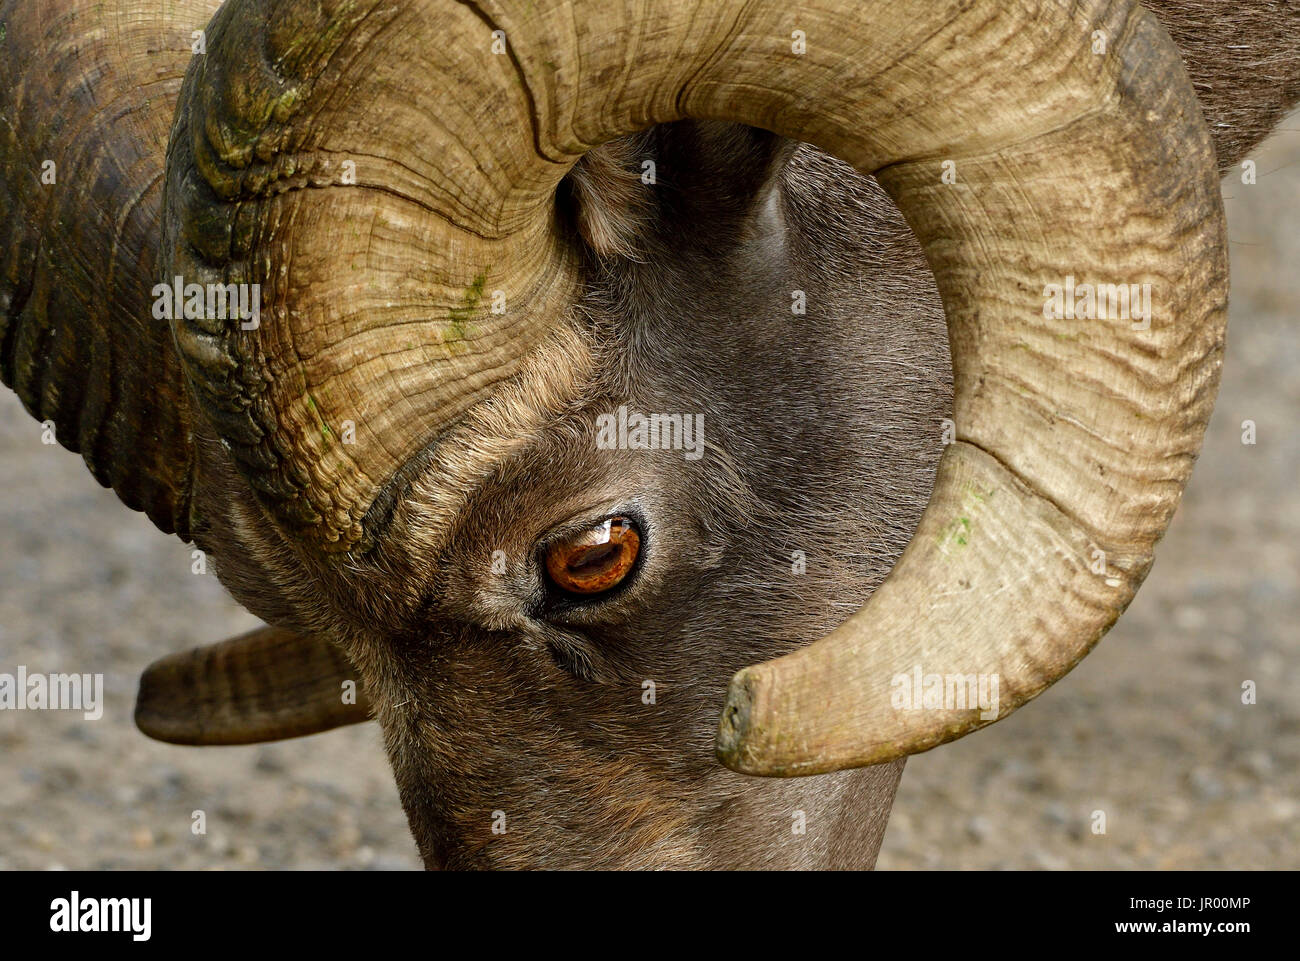 A close up side view of a wild bighorn sheep's face showing the eye and curl of his horn Stock Photo